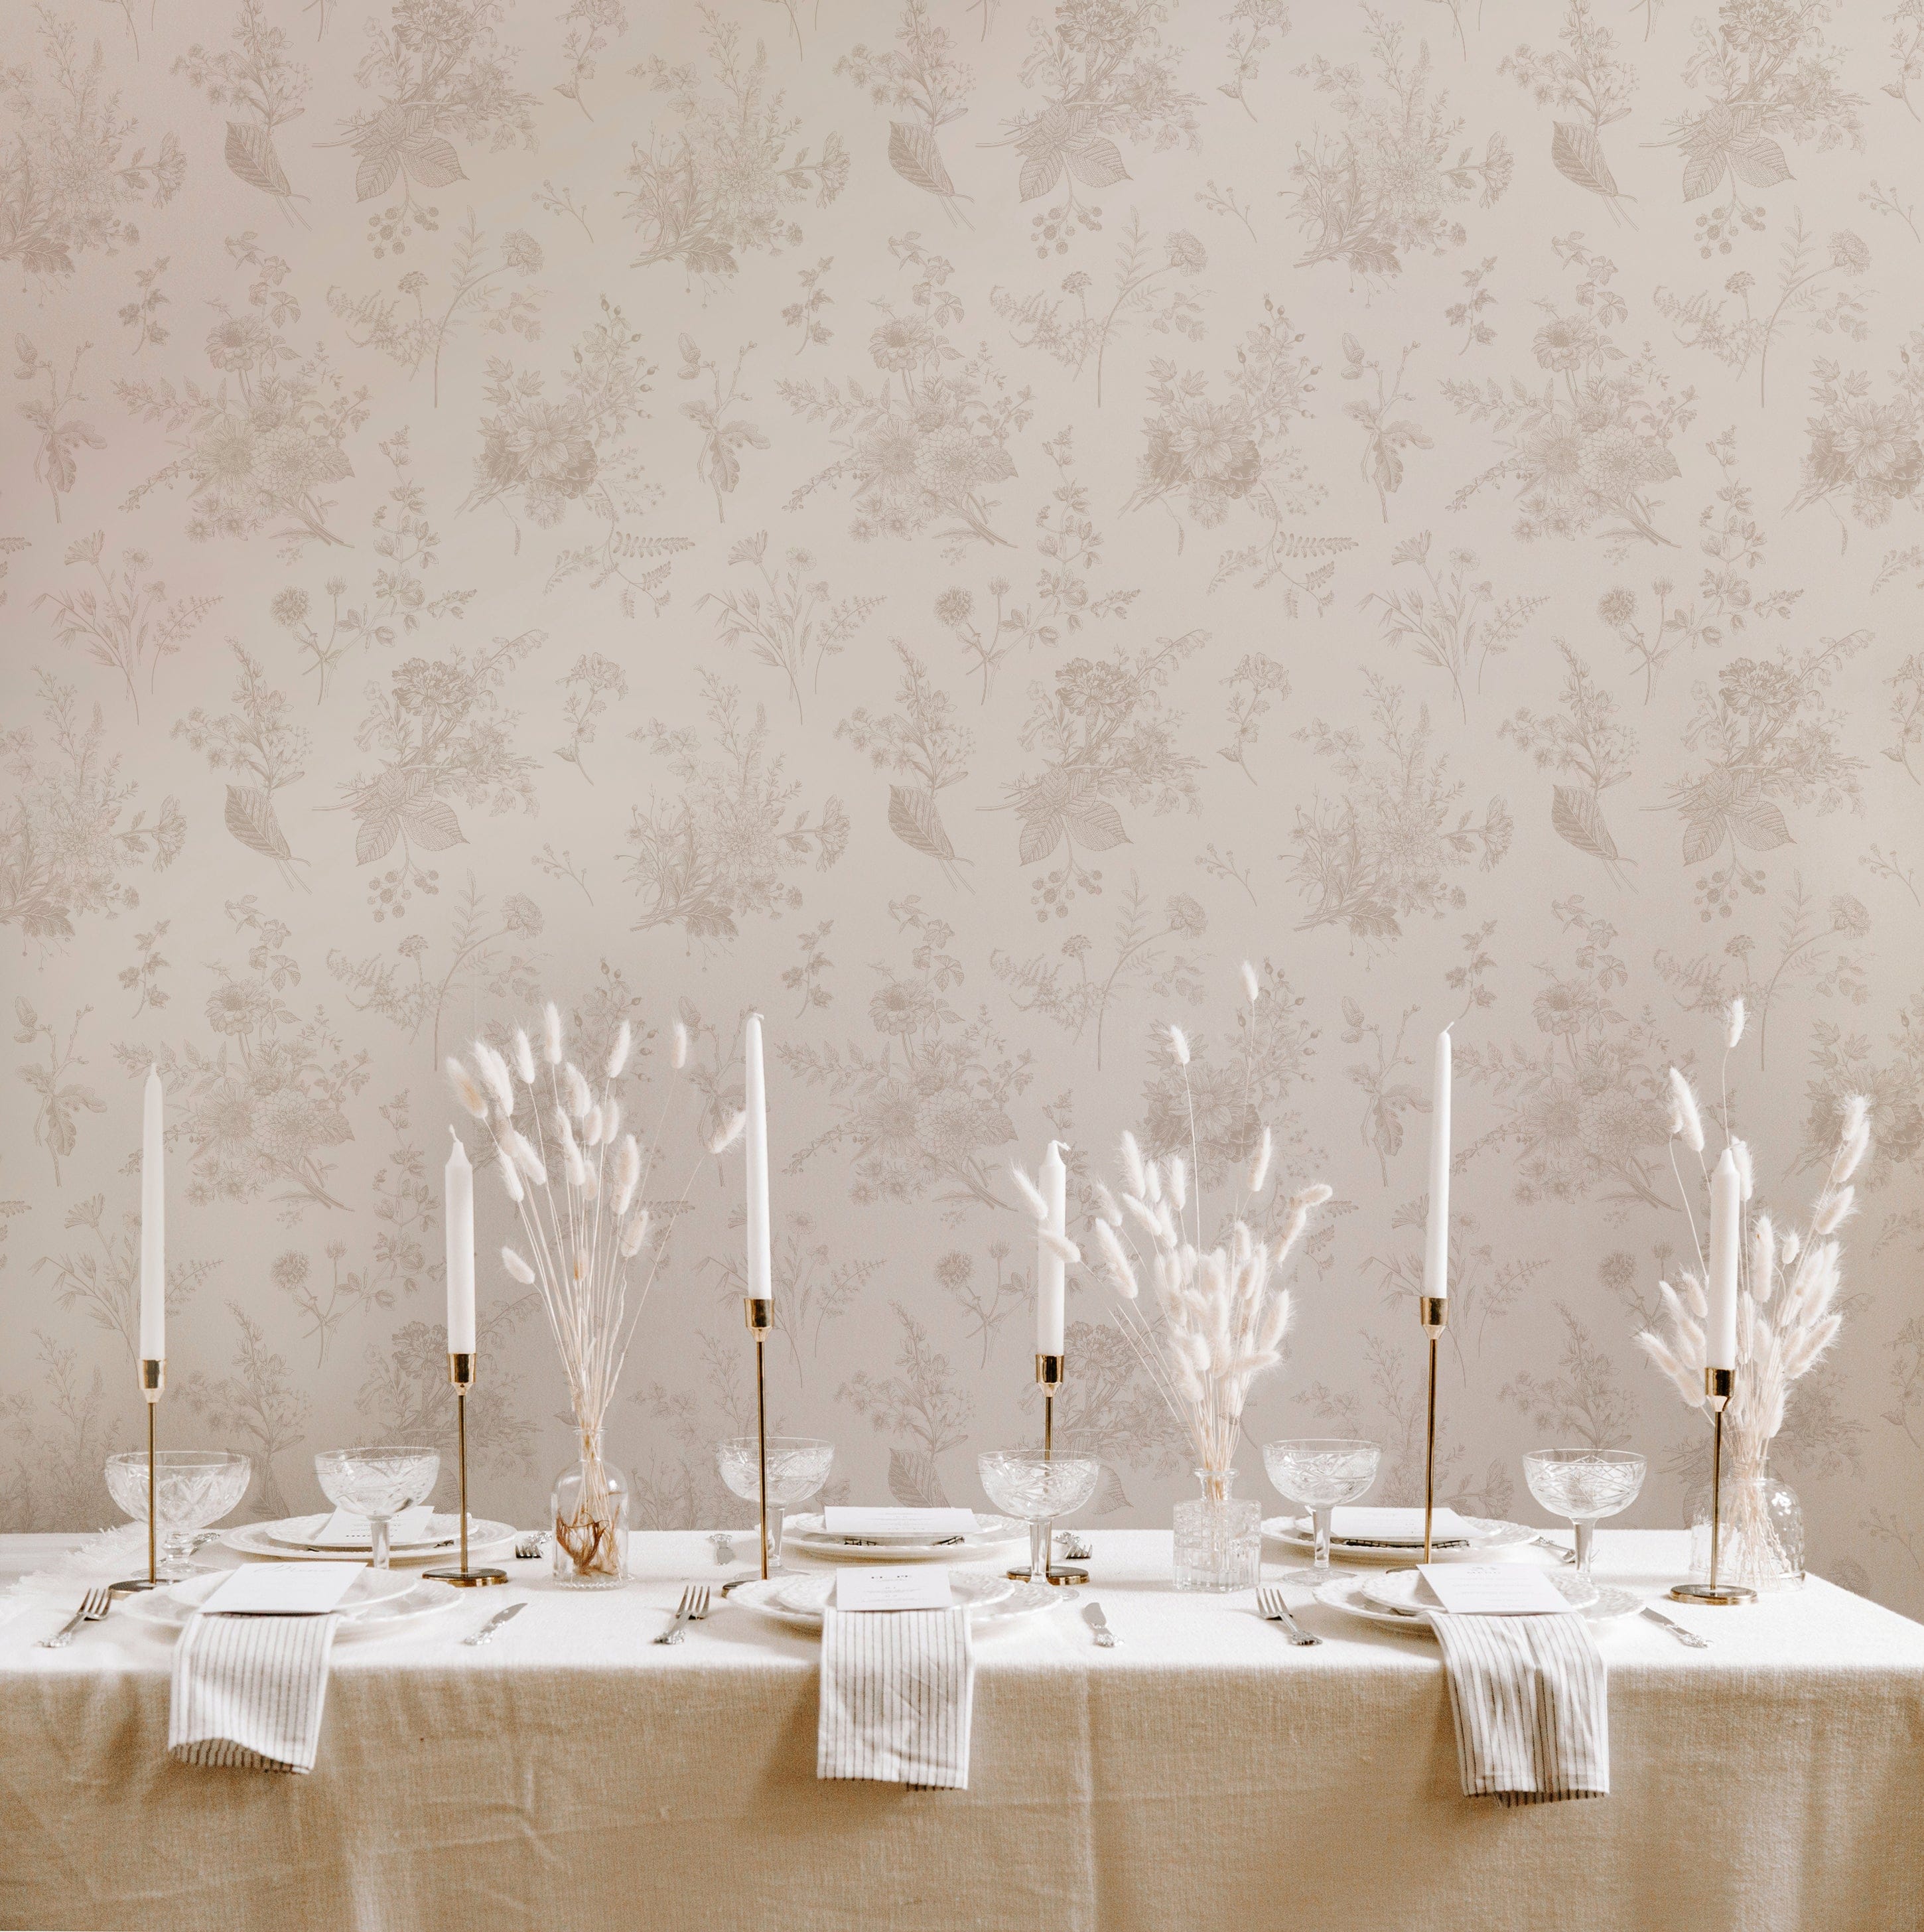 A dining area elegantly set against the Jouyful Garden Wallpaper, which features a delicate and traditional pattern of botanical sketches. The wall creates a refined and soft backdrop for the dining table, which is dressed in a natural linen tablecloth and set with white plates, clear glassware, and tall, slender candlesticks. The overall effect is one of understated luxury and pastoral charm.